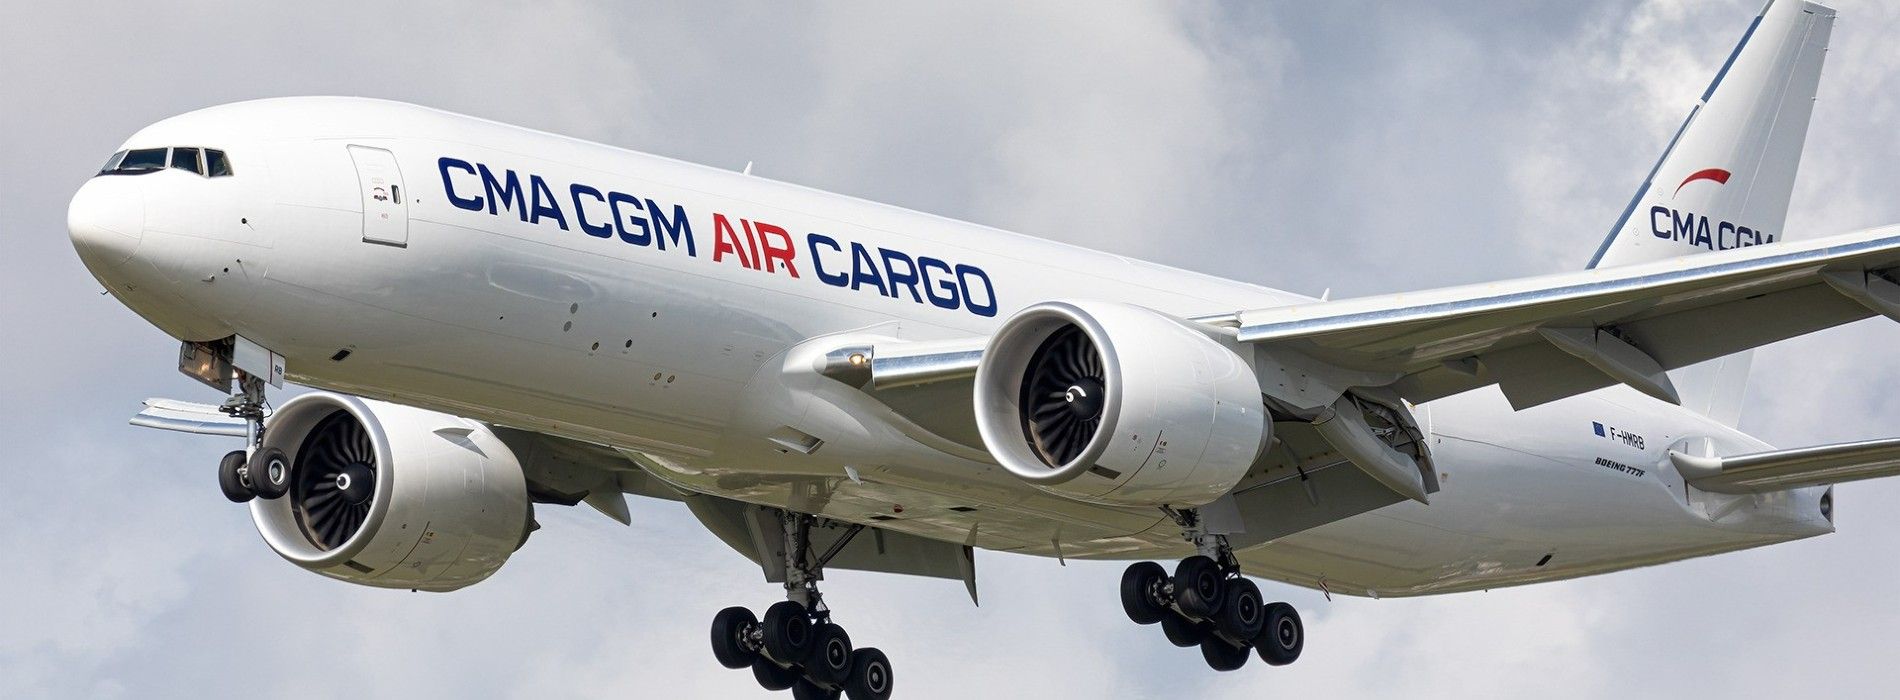 CMA CGM Plans Chicago Cargo Route With 2 New Boeing B777F & 8 